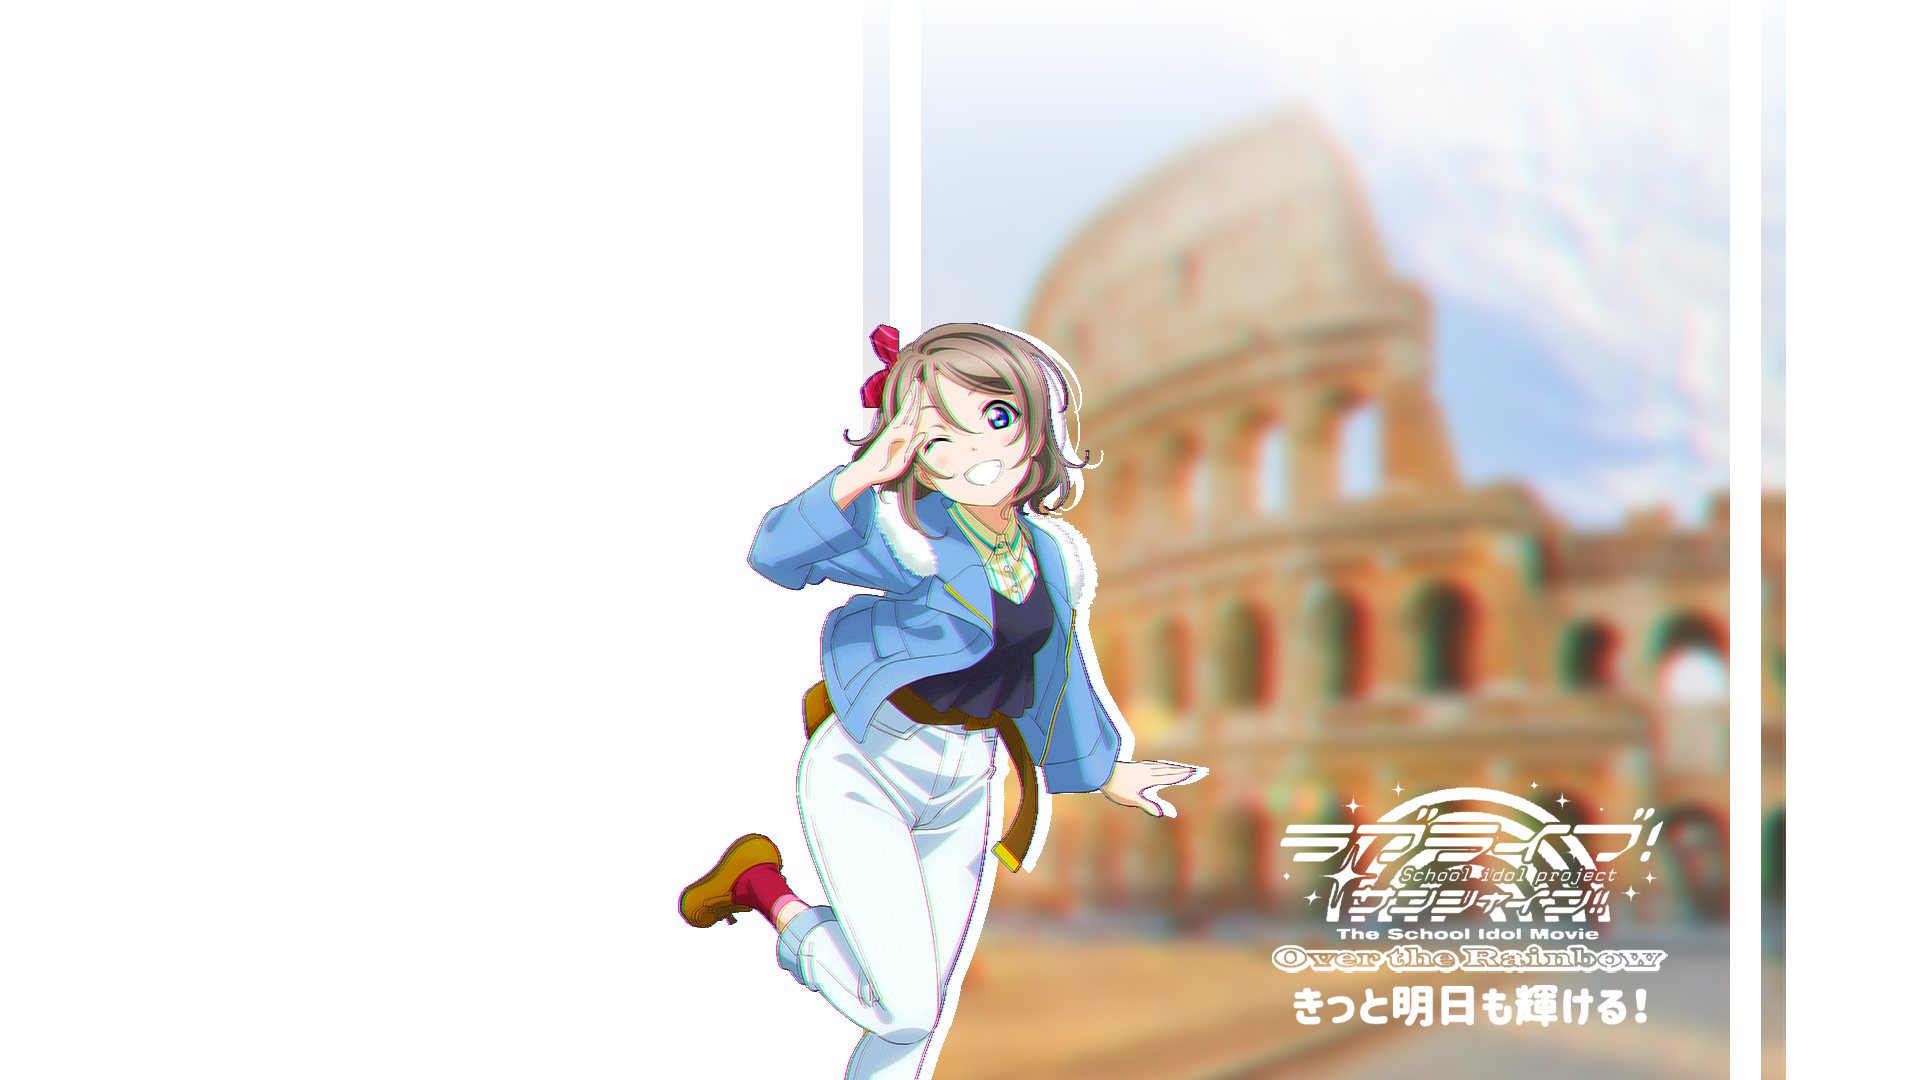 Anime 1920x1080 Love Live! Sunshine Watanabe You Colosseum picture-in-picture